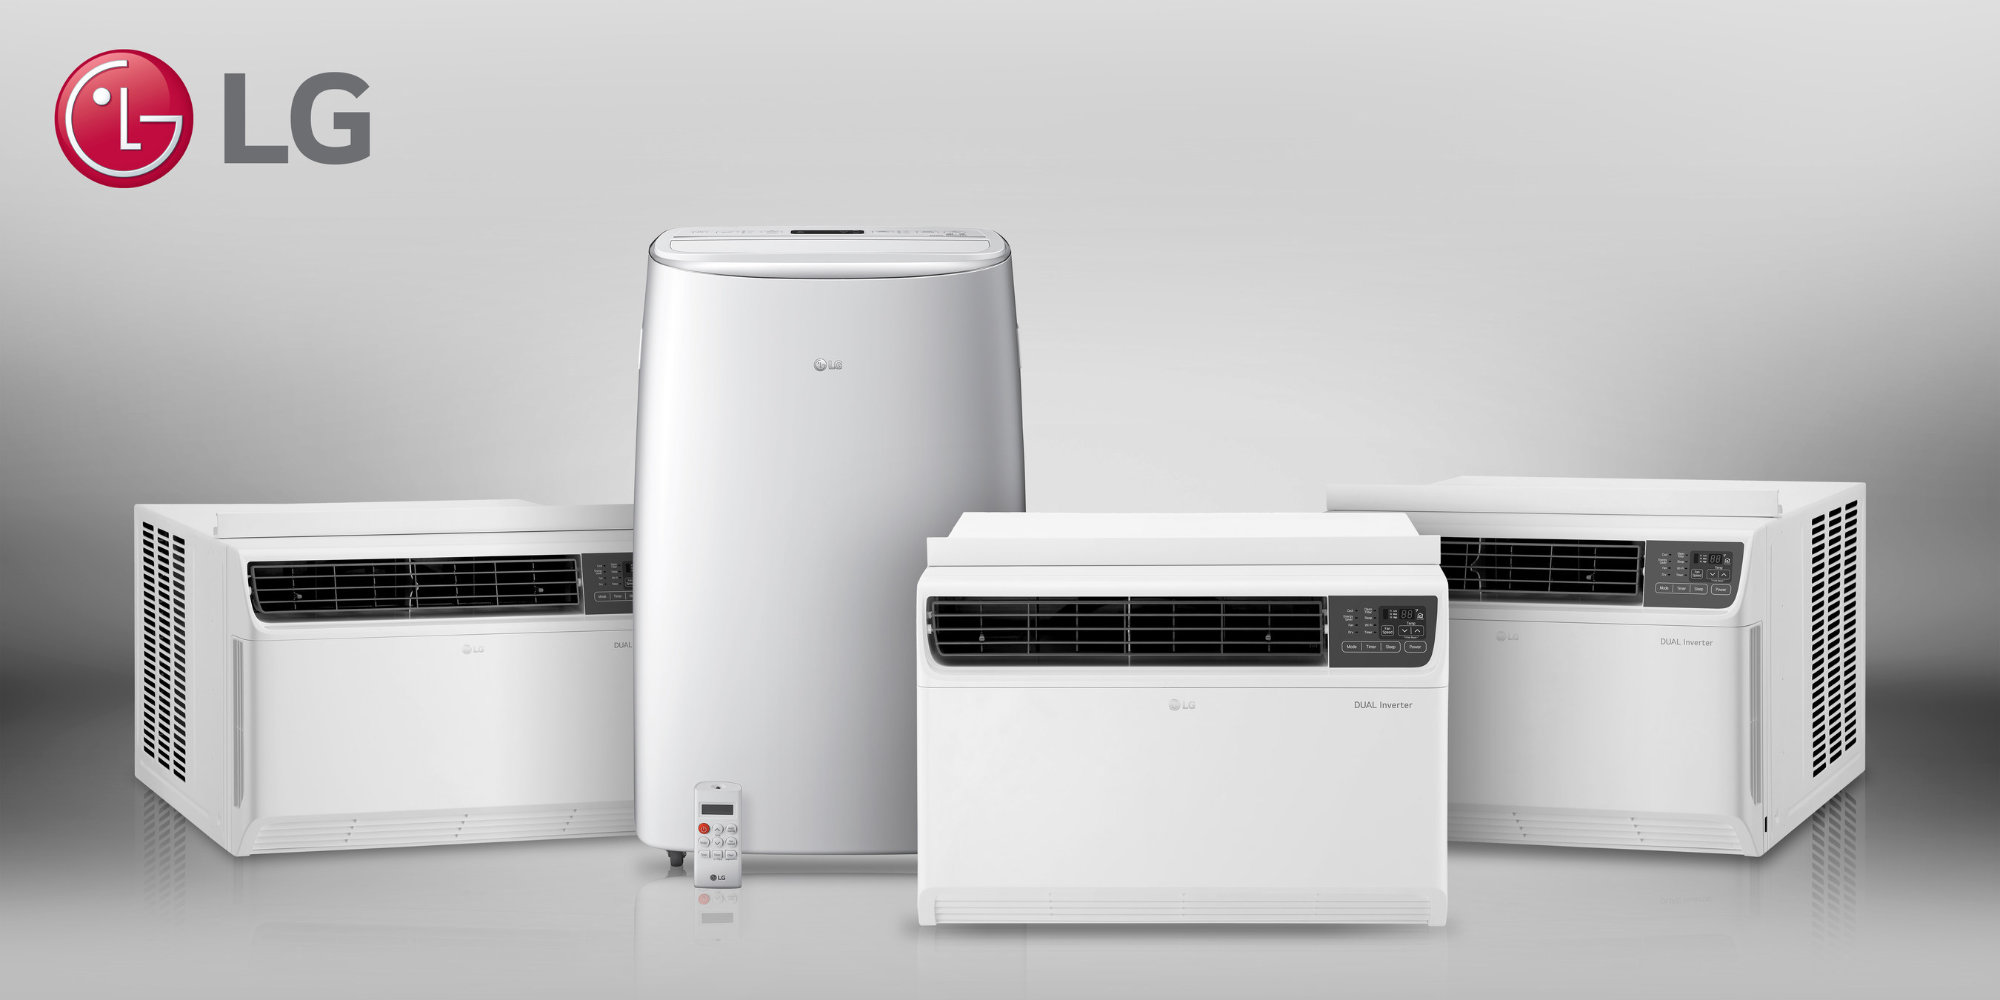 LG's Smart Air Conditioner is portable 